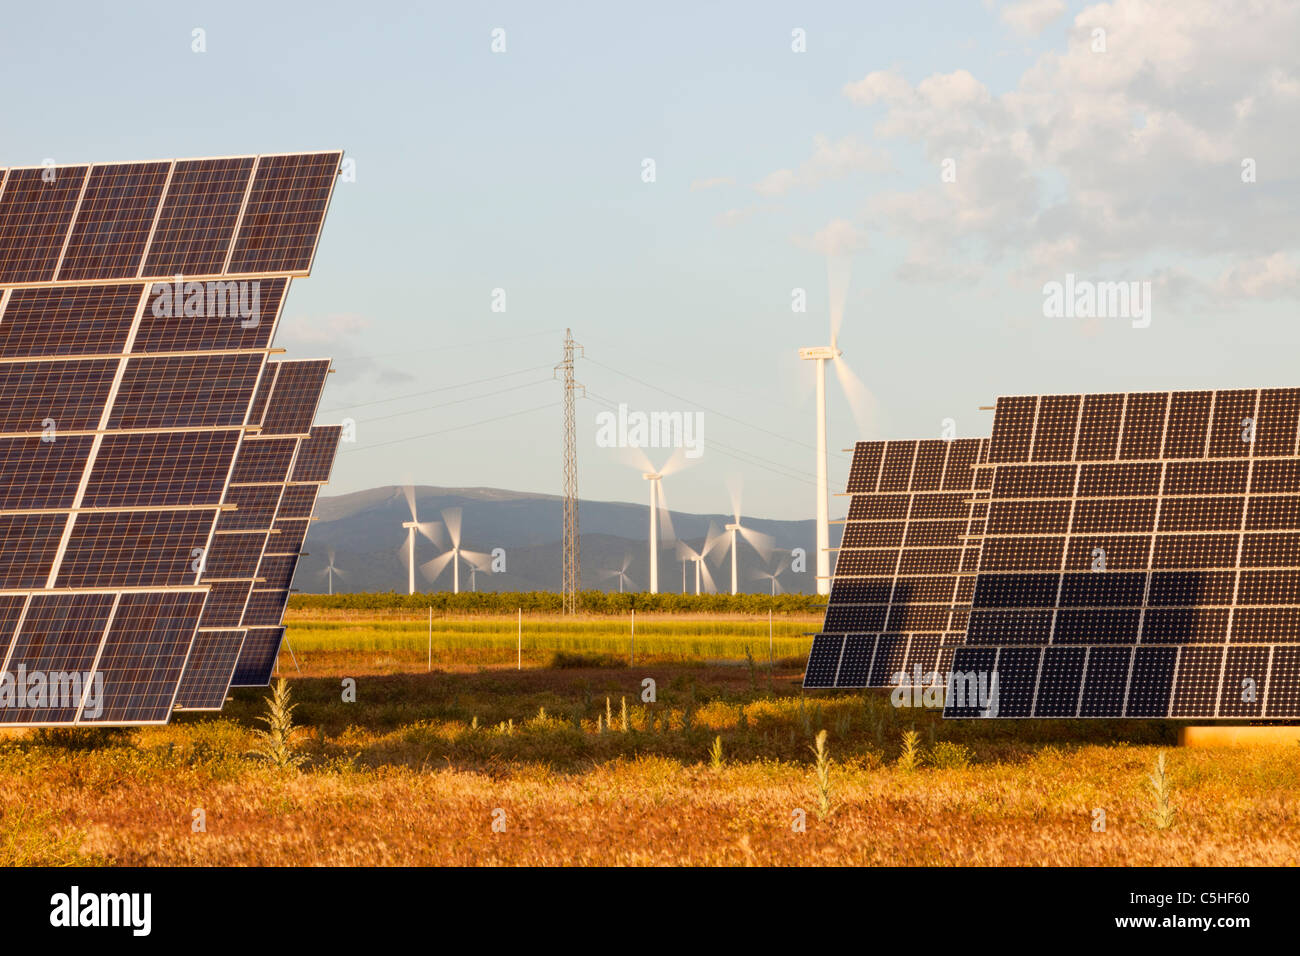 A photo voltaic solar power station near Guadix, Andalucia, Spain, with a wind farm behind. Stock Photo